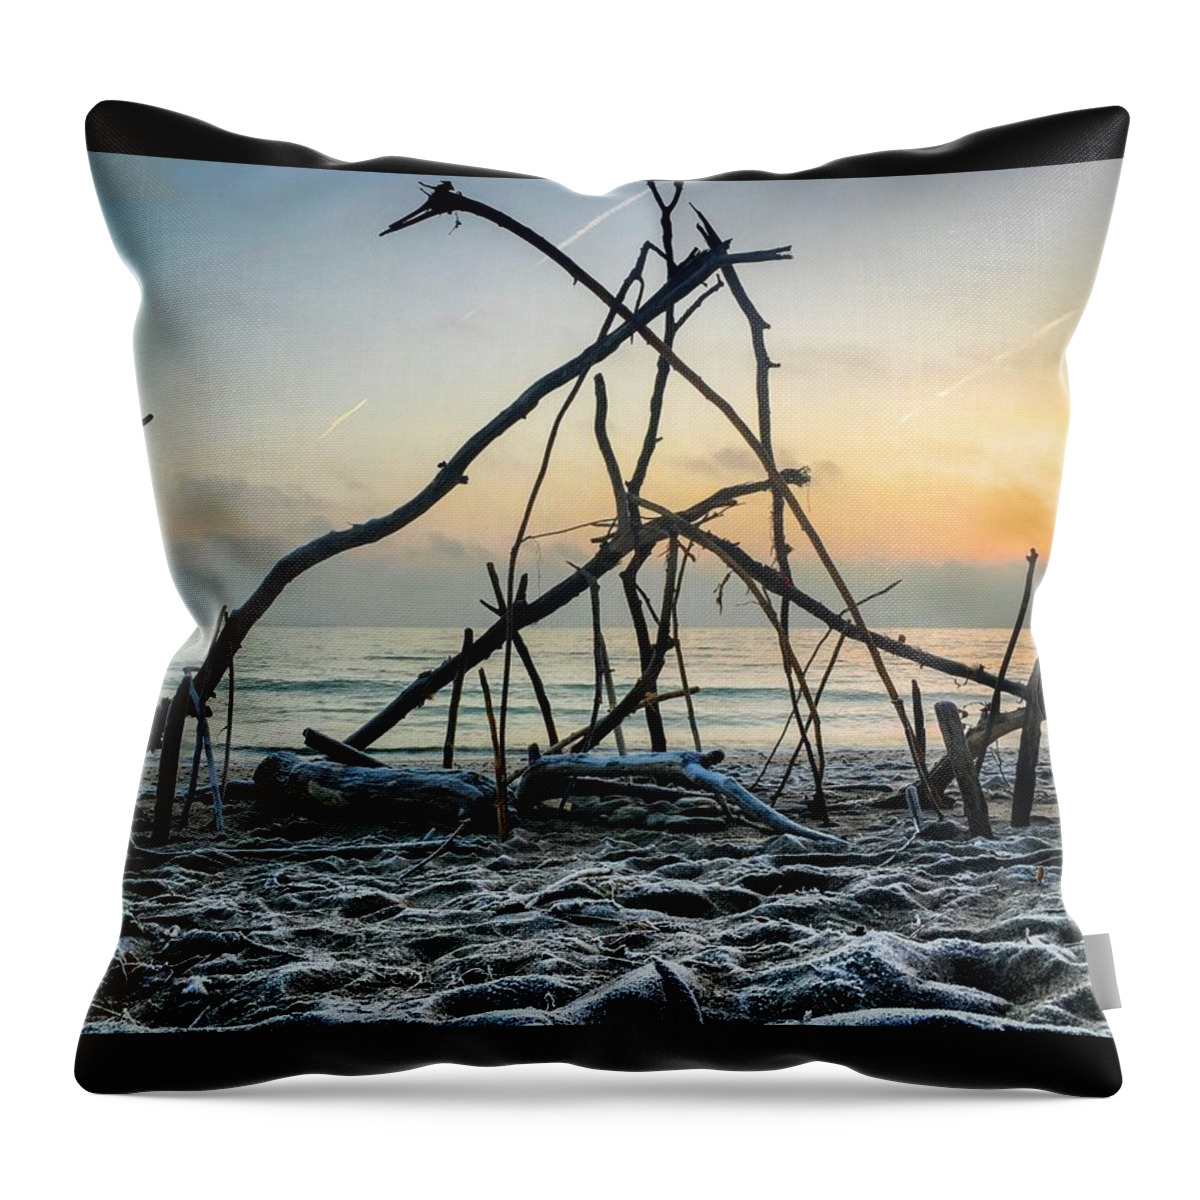 Lake Throw Pillow featuring the photograph Crown by Terri Hart-Ellis